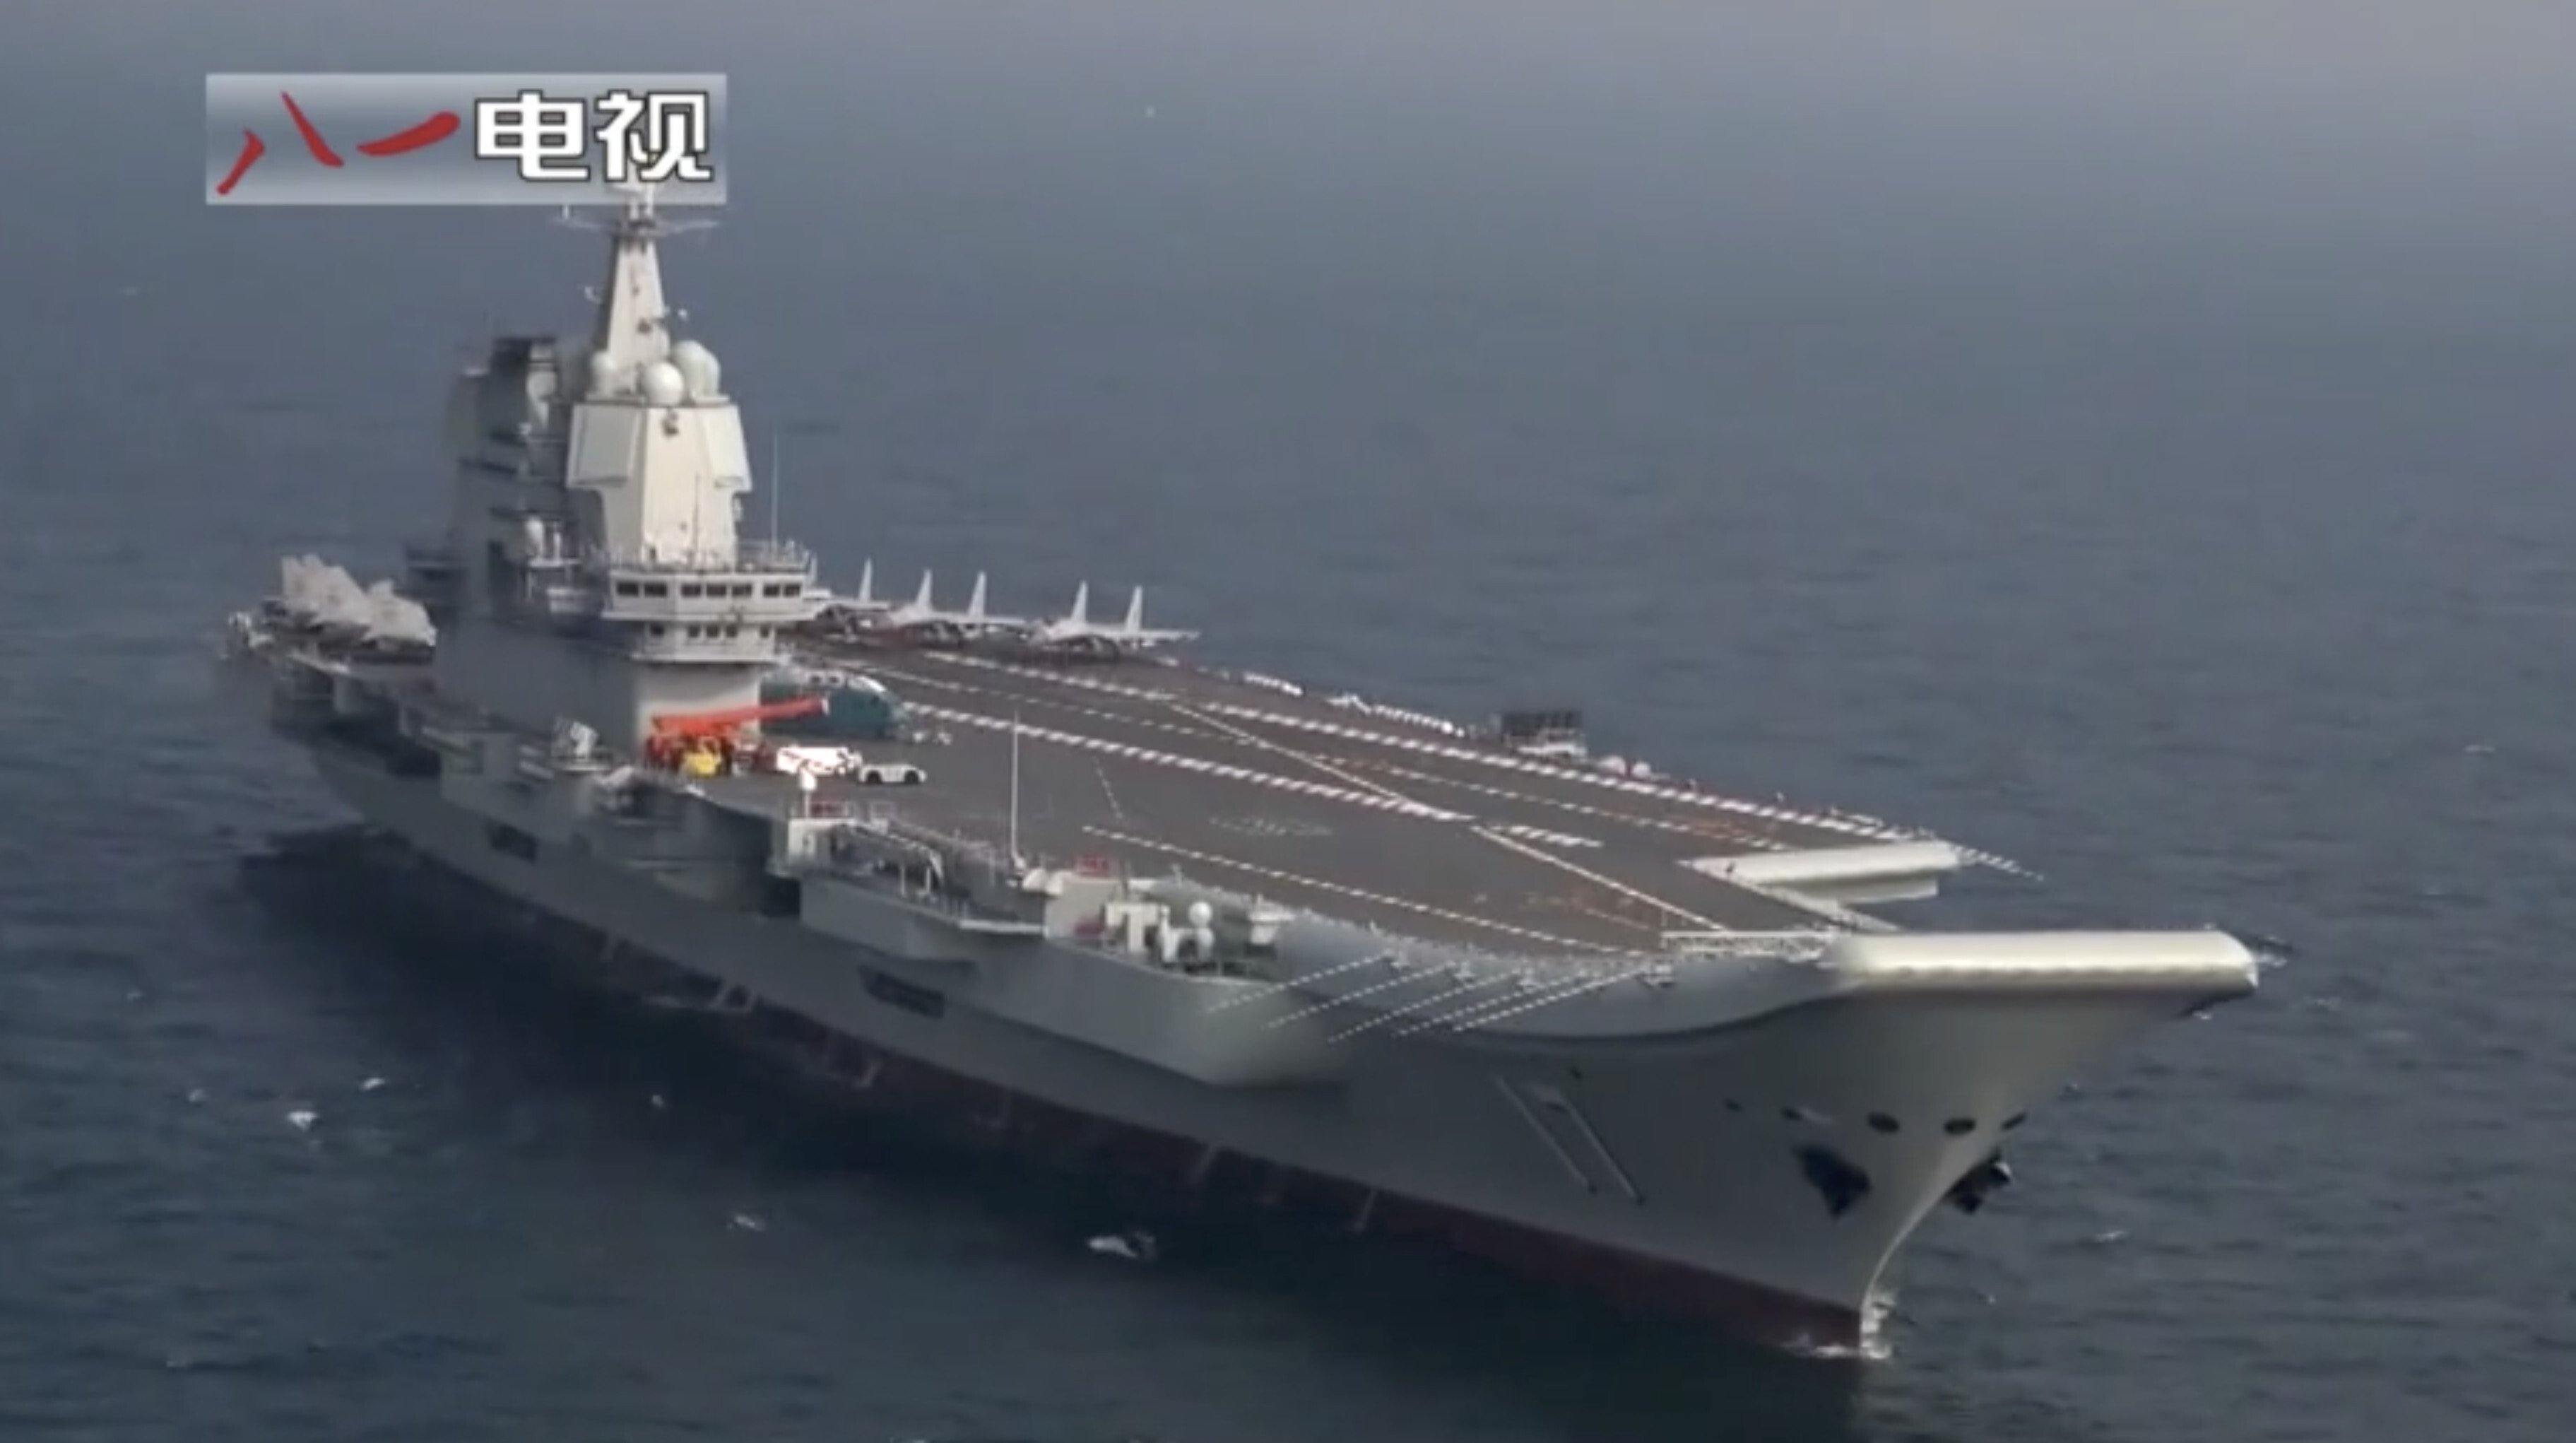 China's Shandong aircraft carrier is ready for high seas testing, insiders say | South China Morning Post